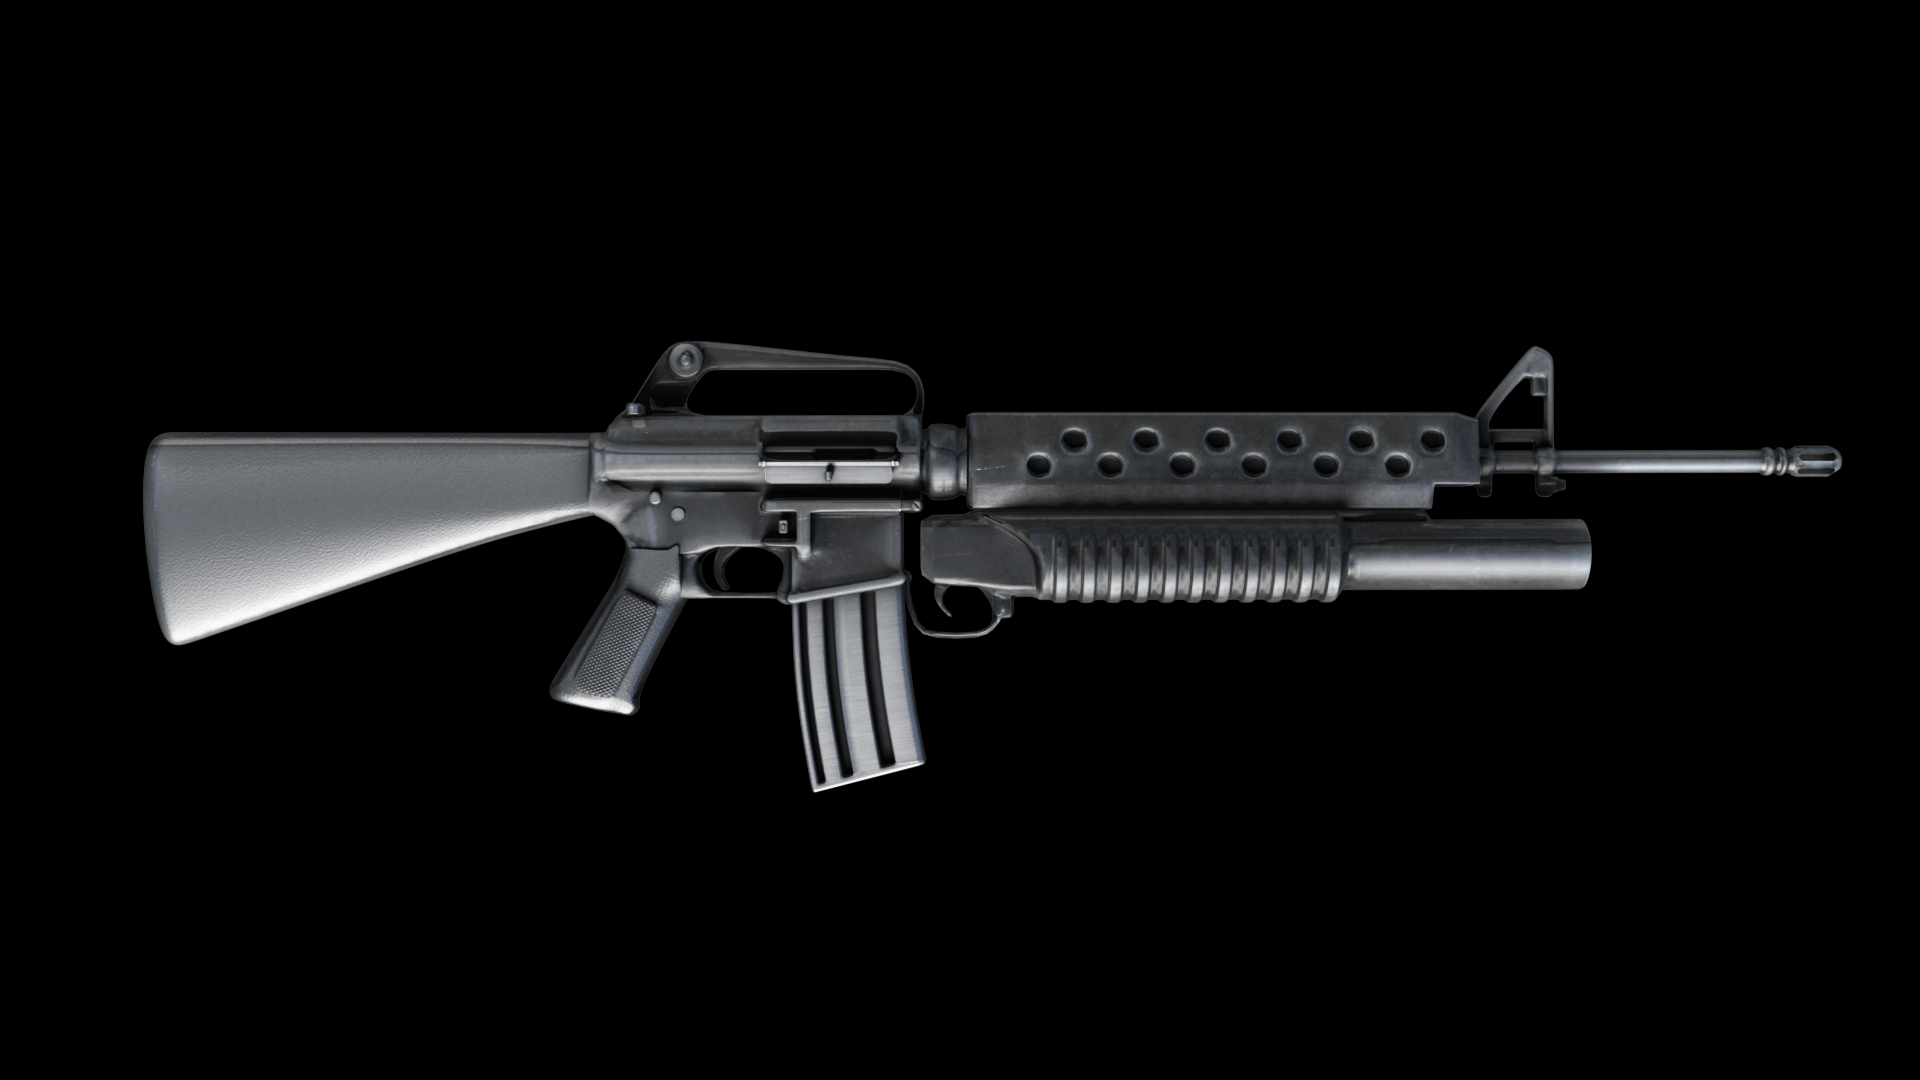 m16 rifle with grenade launcher